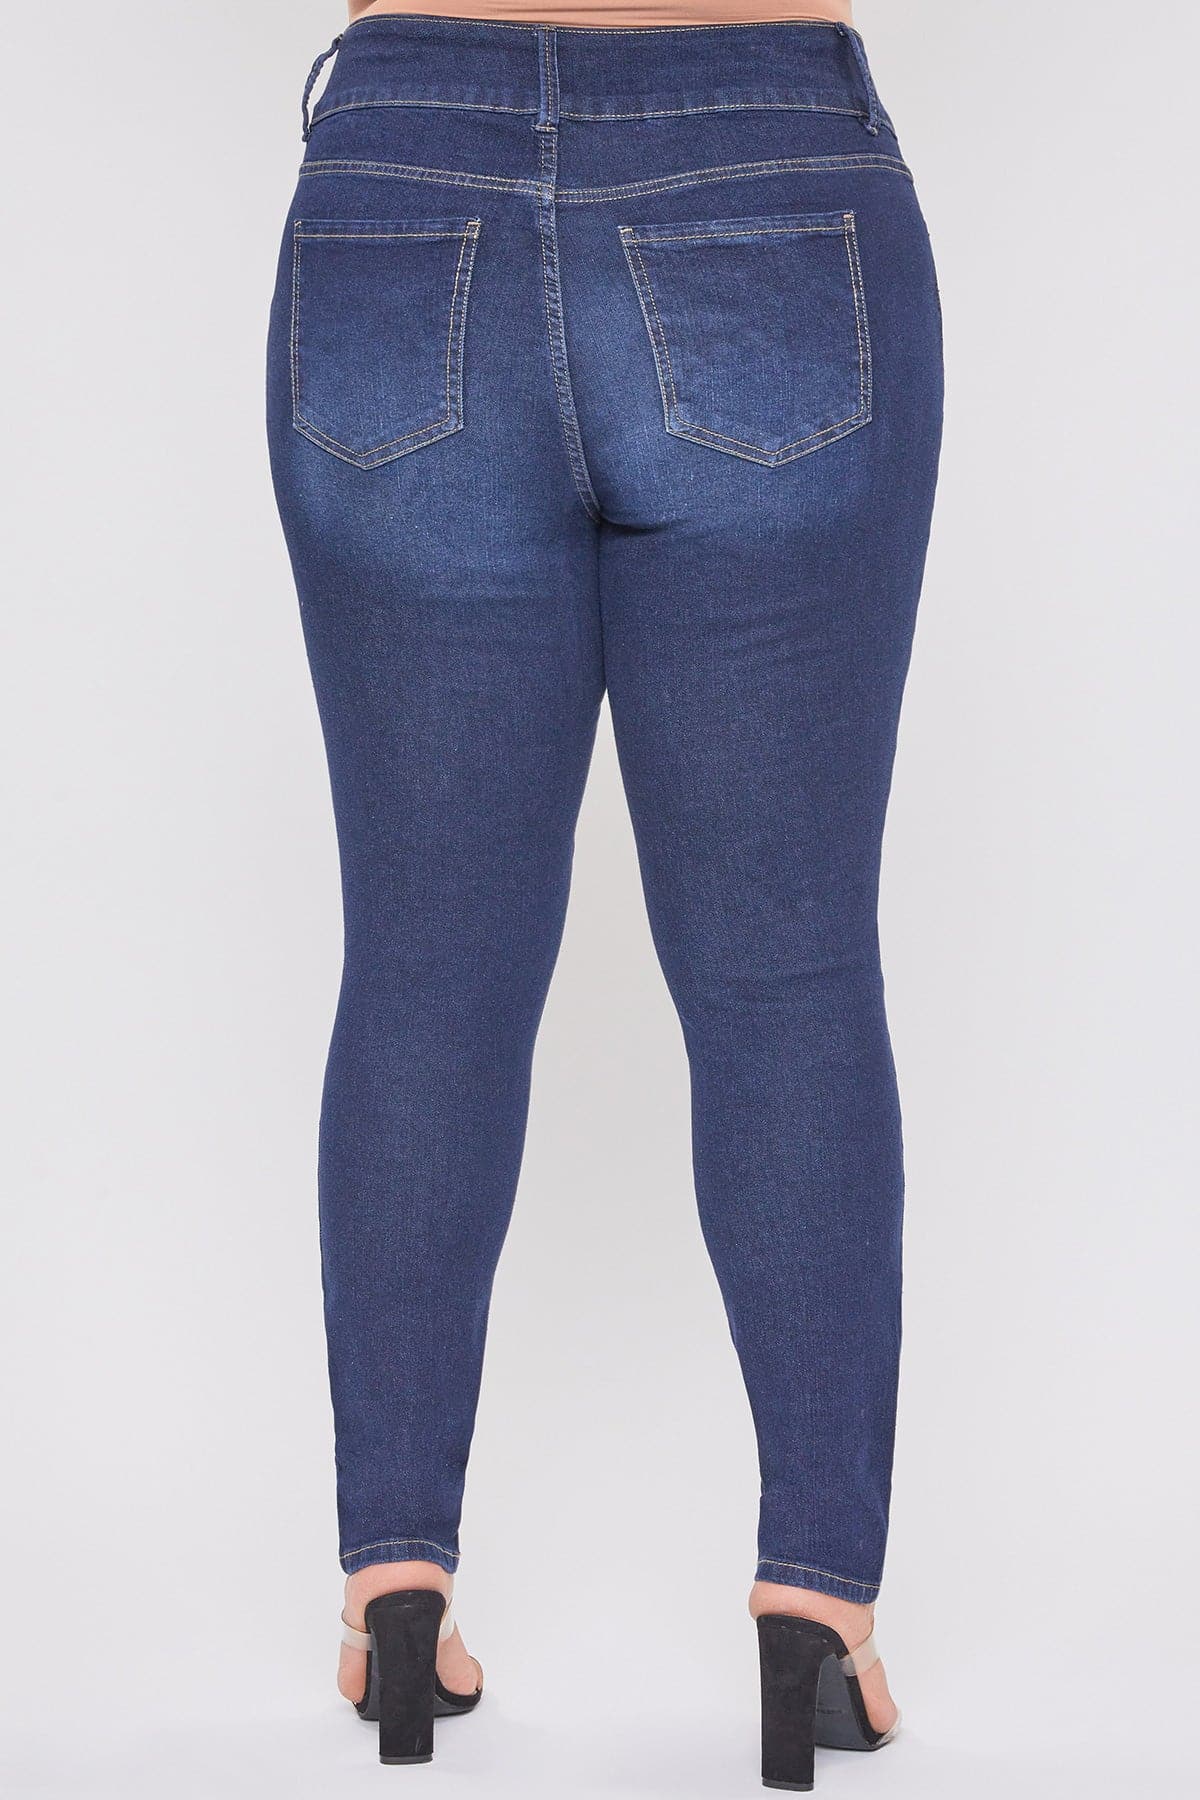 Plus Size Women's Essential Sustainable Skinny Jeans